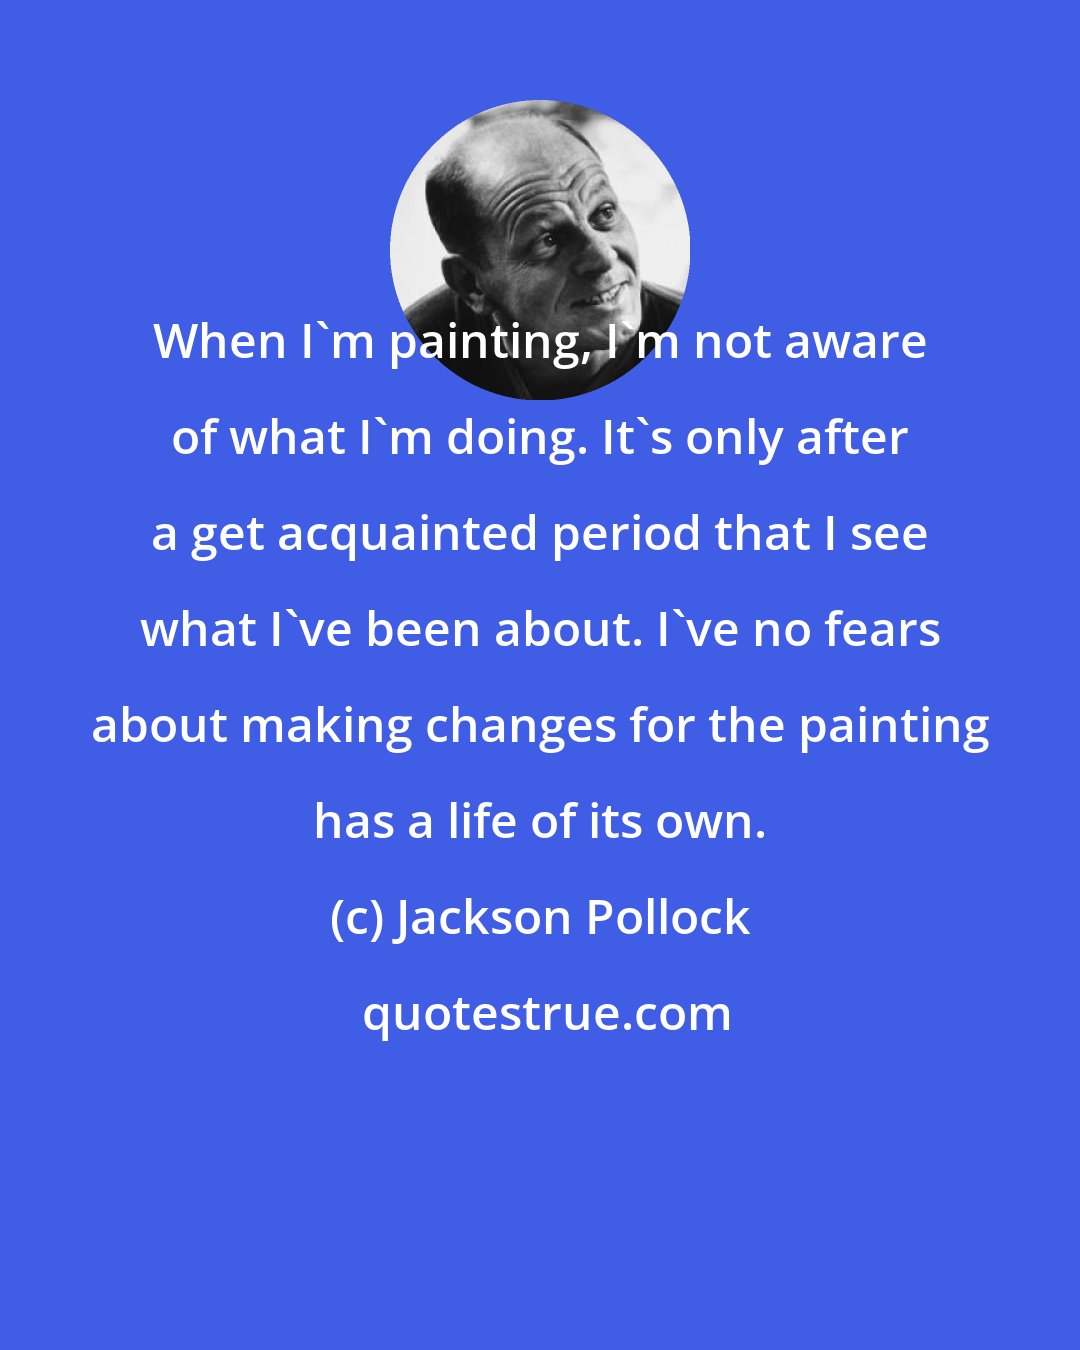 Jackson Pollock: When I'm painting, I'm not aware of what I'm doing. It's only after a get acquainted period that I see what I've been about. I've no fears about making changes for the painting has a life of its own.